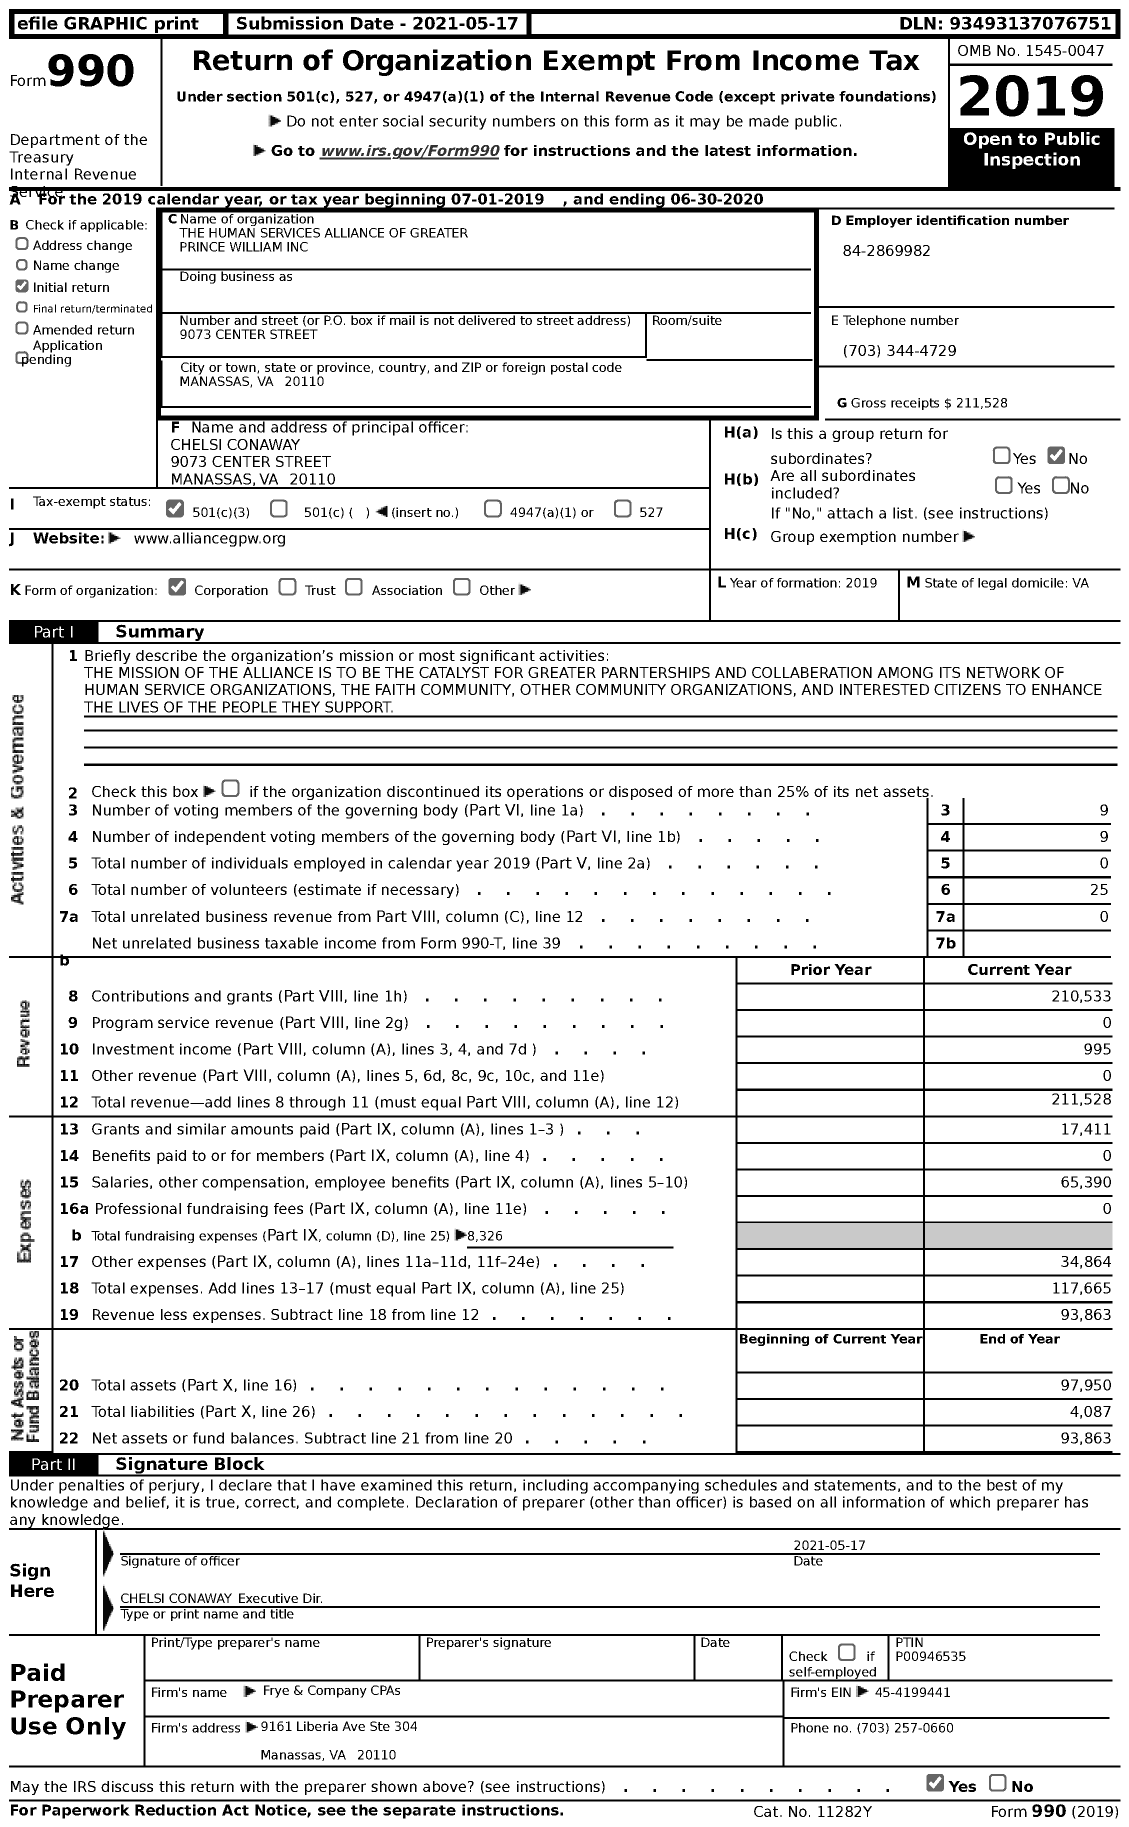 Image of first page of 2019 Form 990 for The Human Services Alliance of Greater Prince William